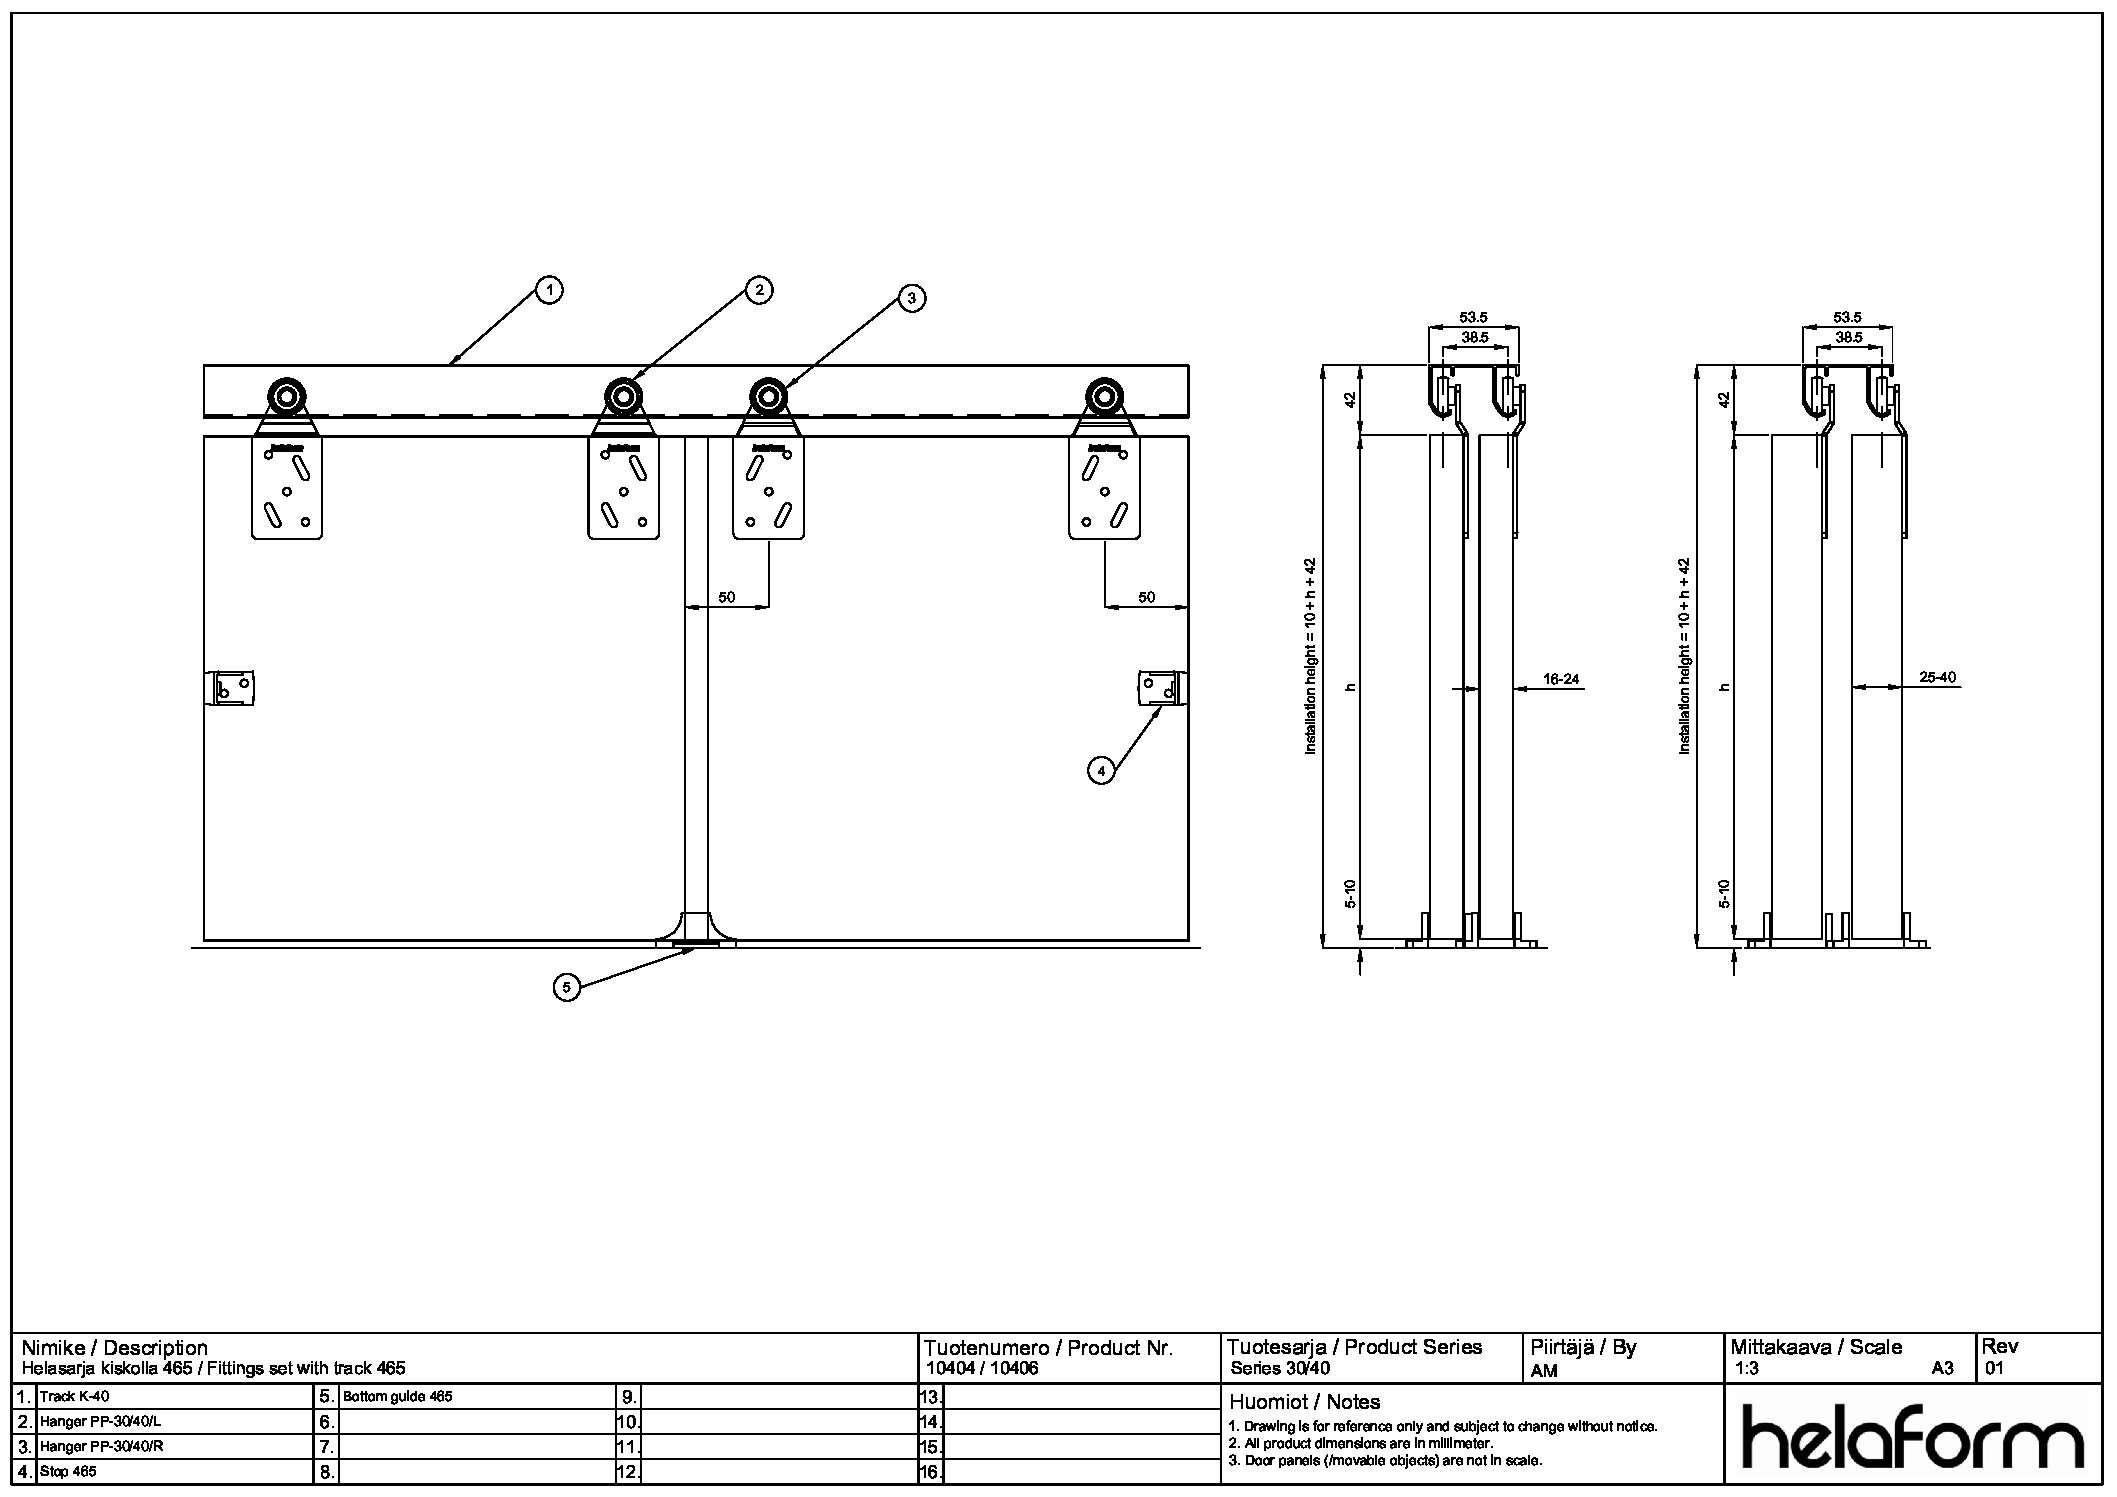 ☆【Interior Design CAD Drawings】@Wardrobe detail and section dwg files